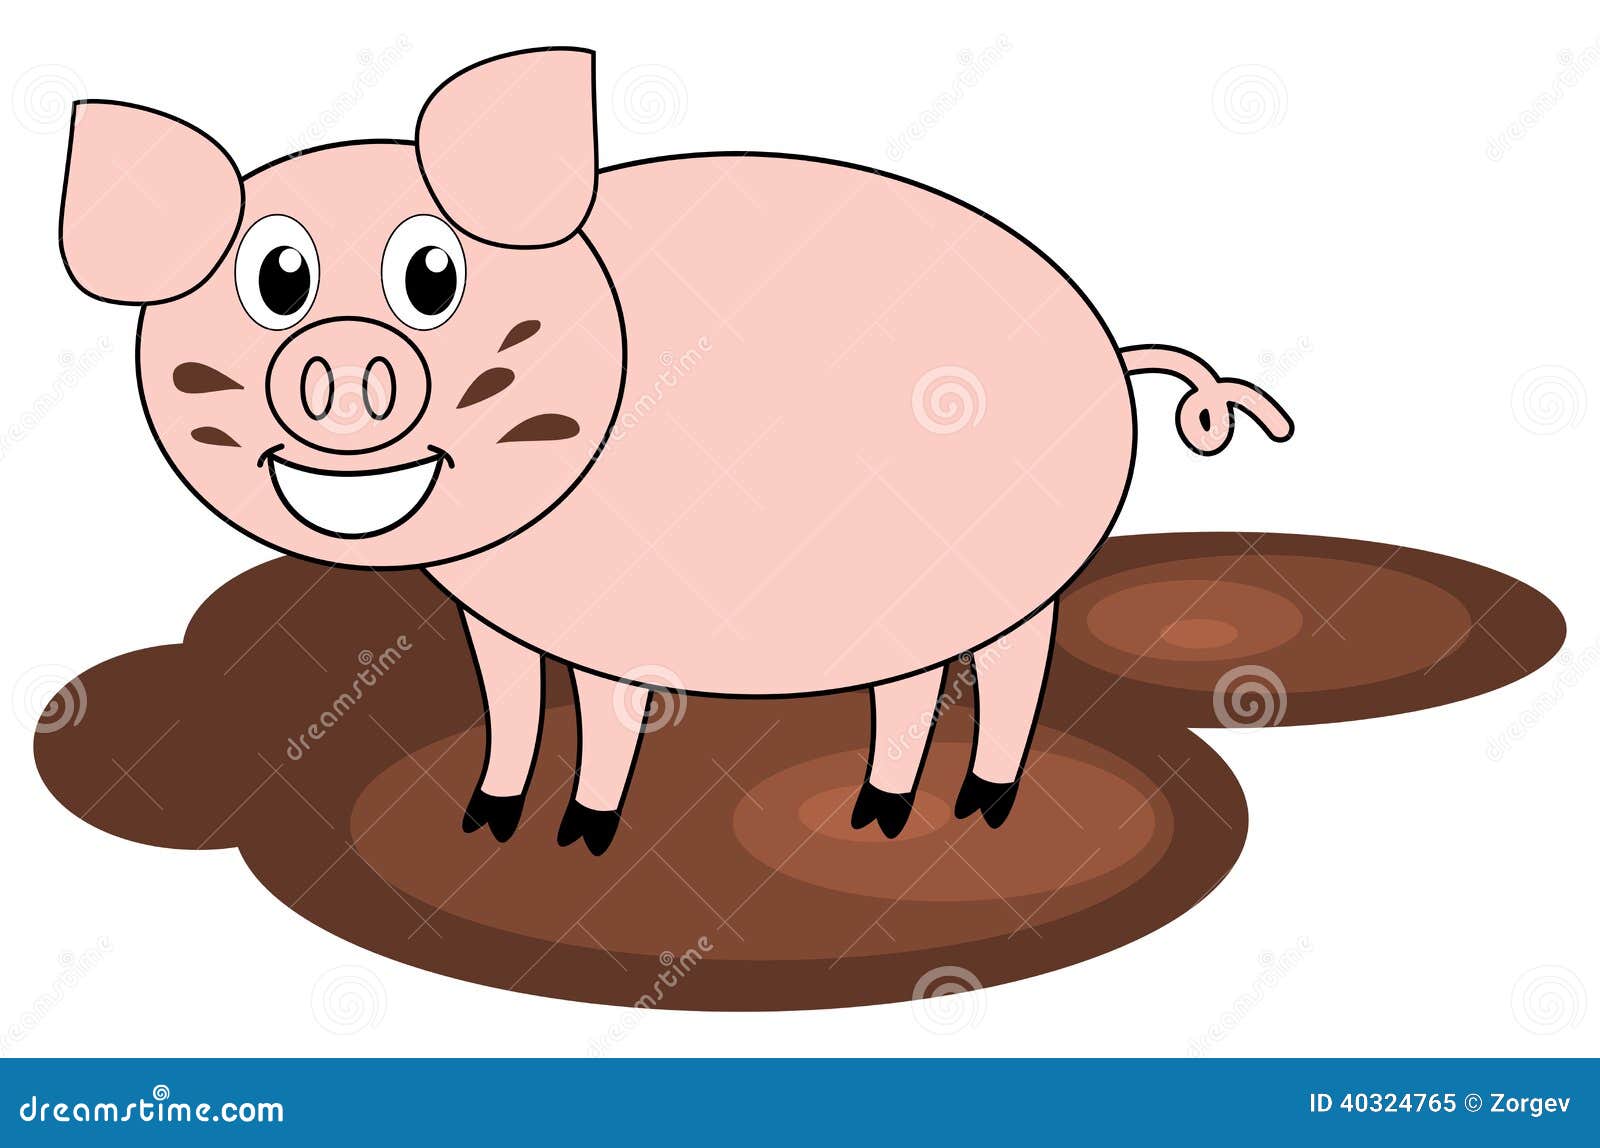 clipart pig in mud - photo #23